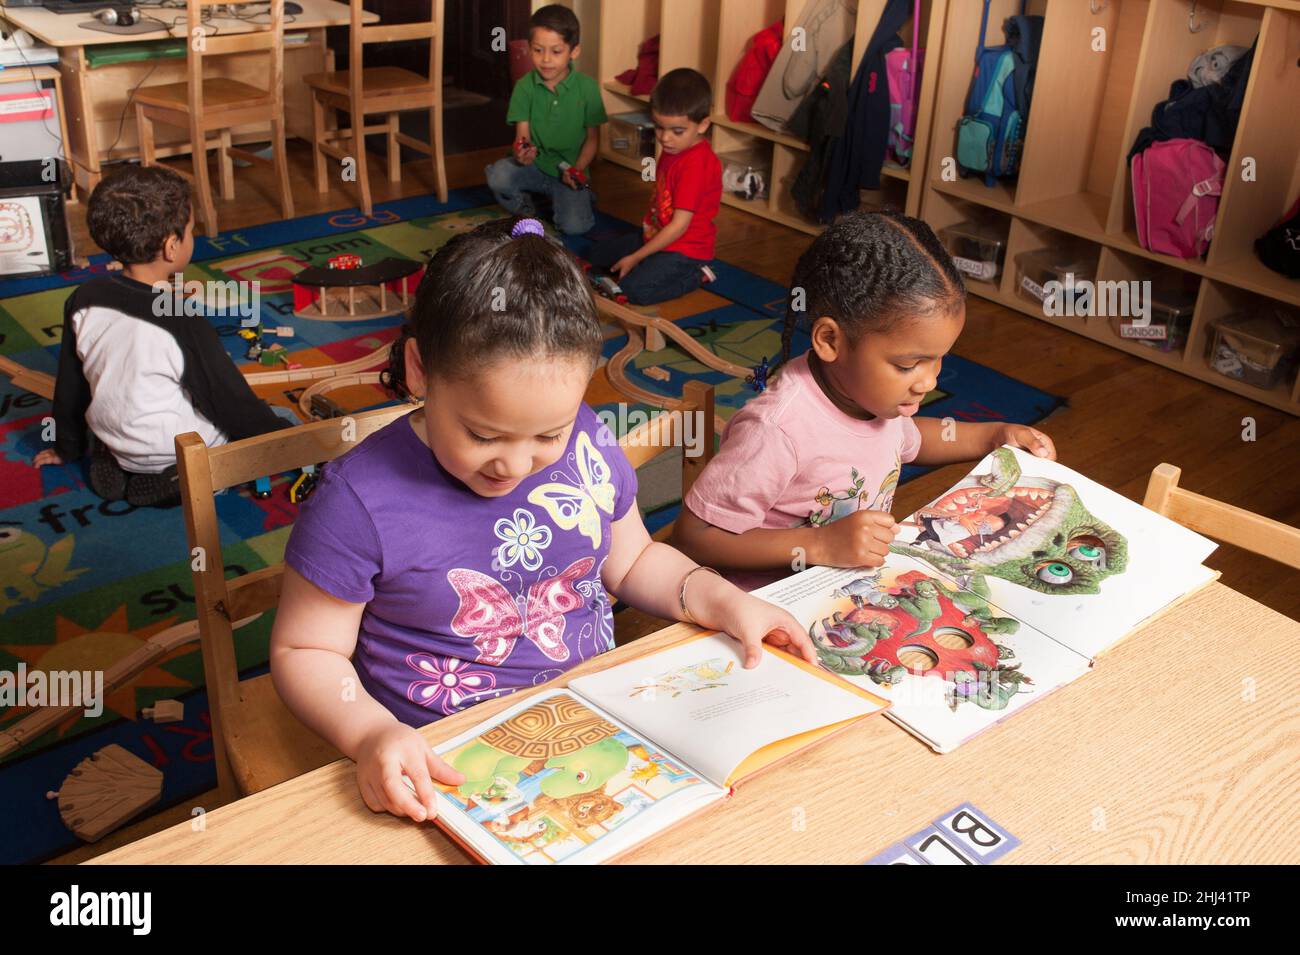 Education Preschool 4 year olds two girls sitting at table and looking quietly at books while group of boys play with train set and tracks in backgrou Stock Photo